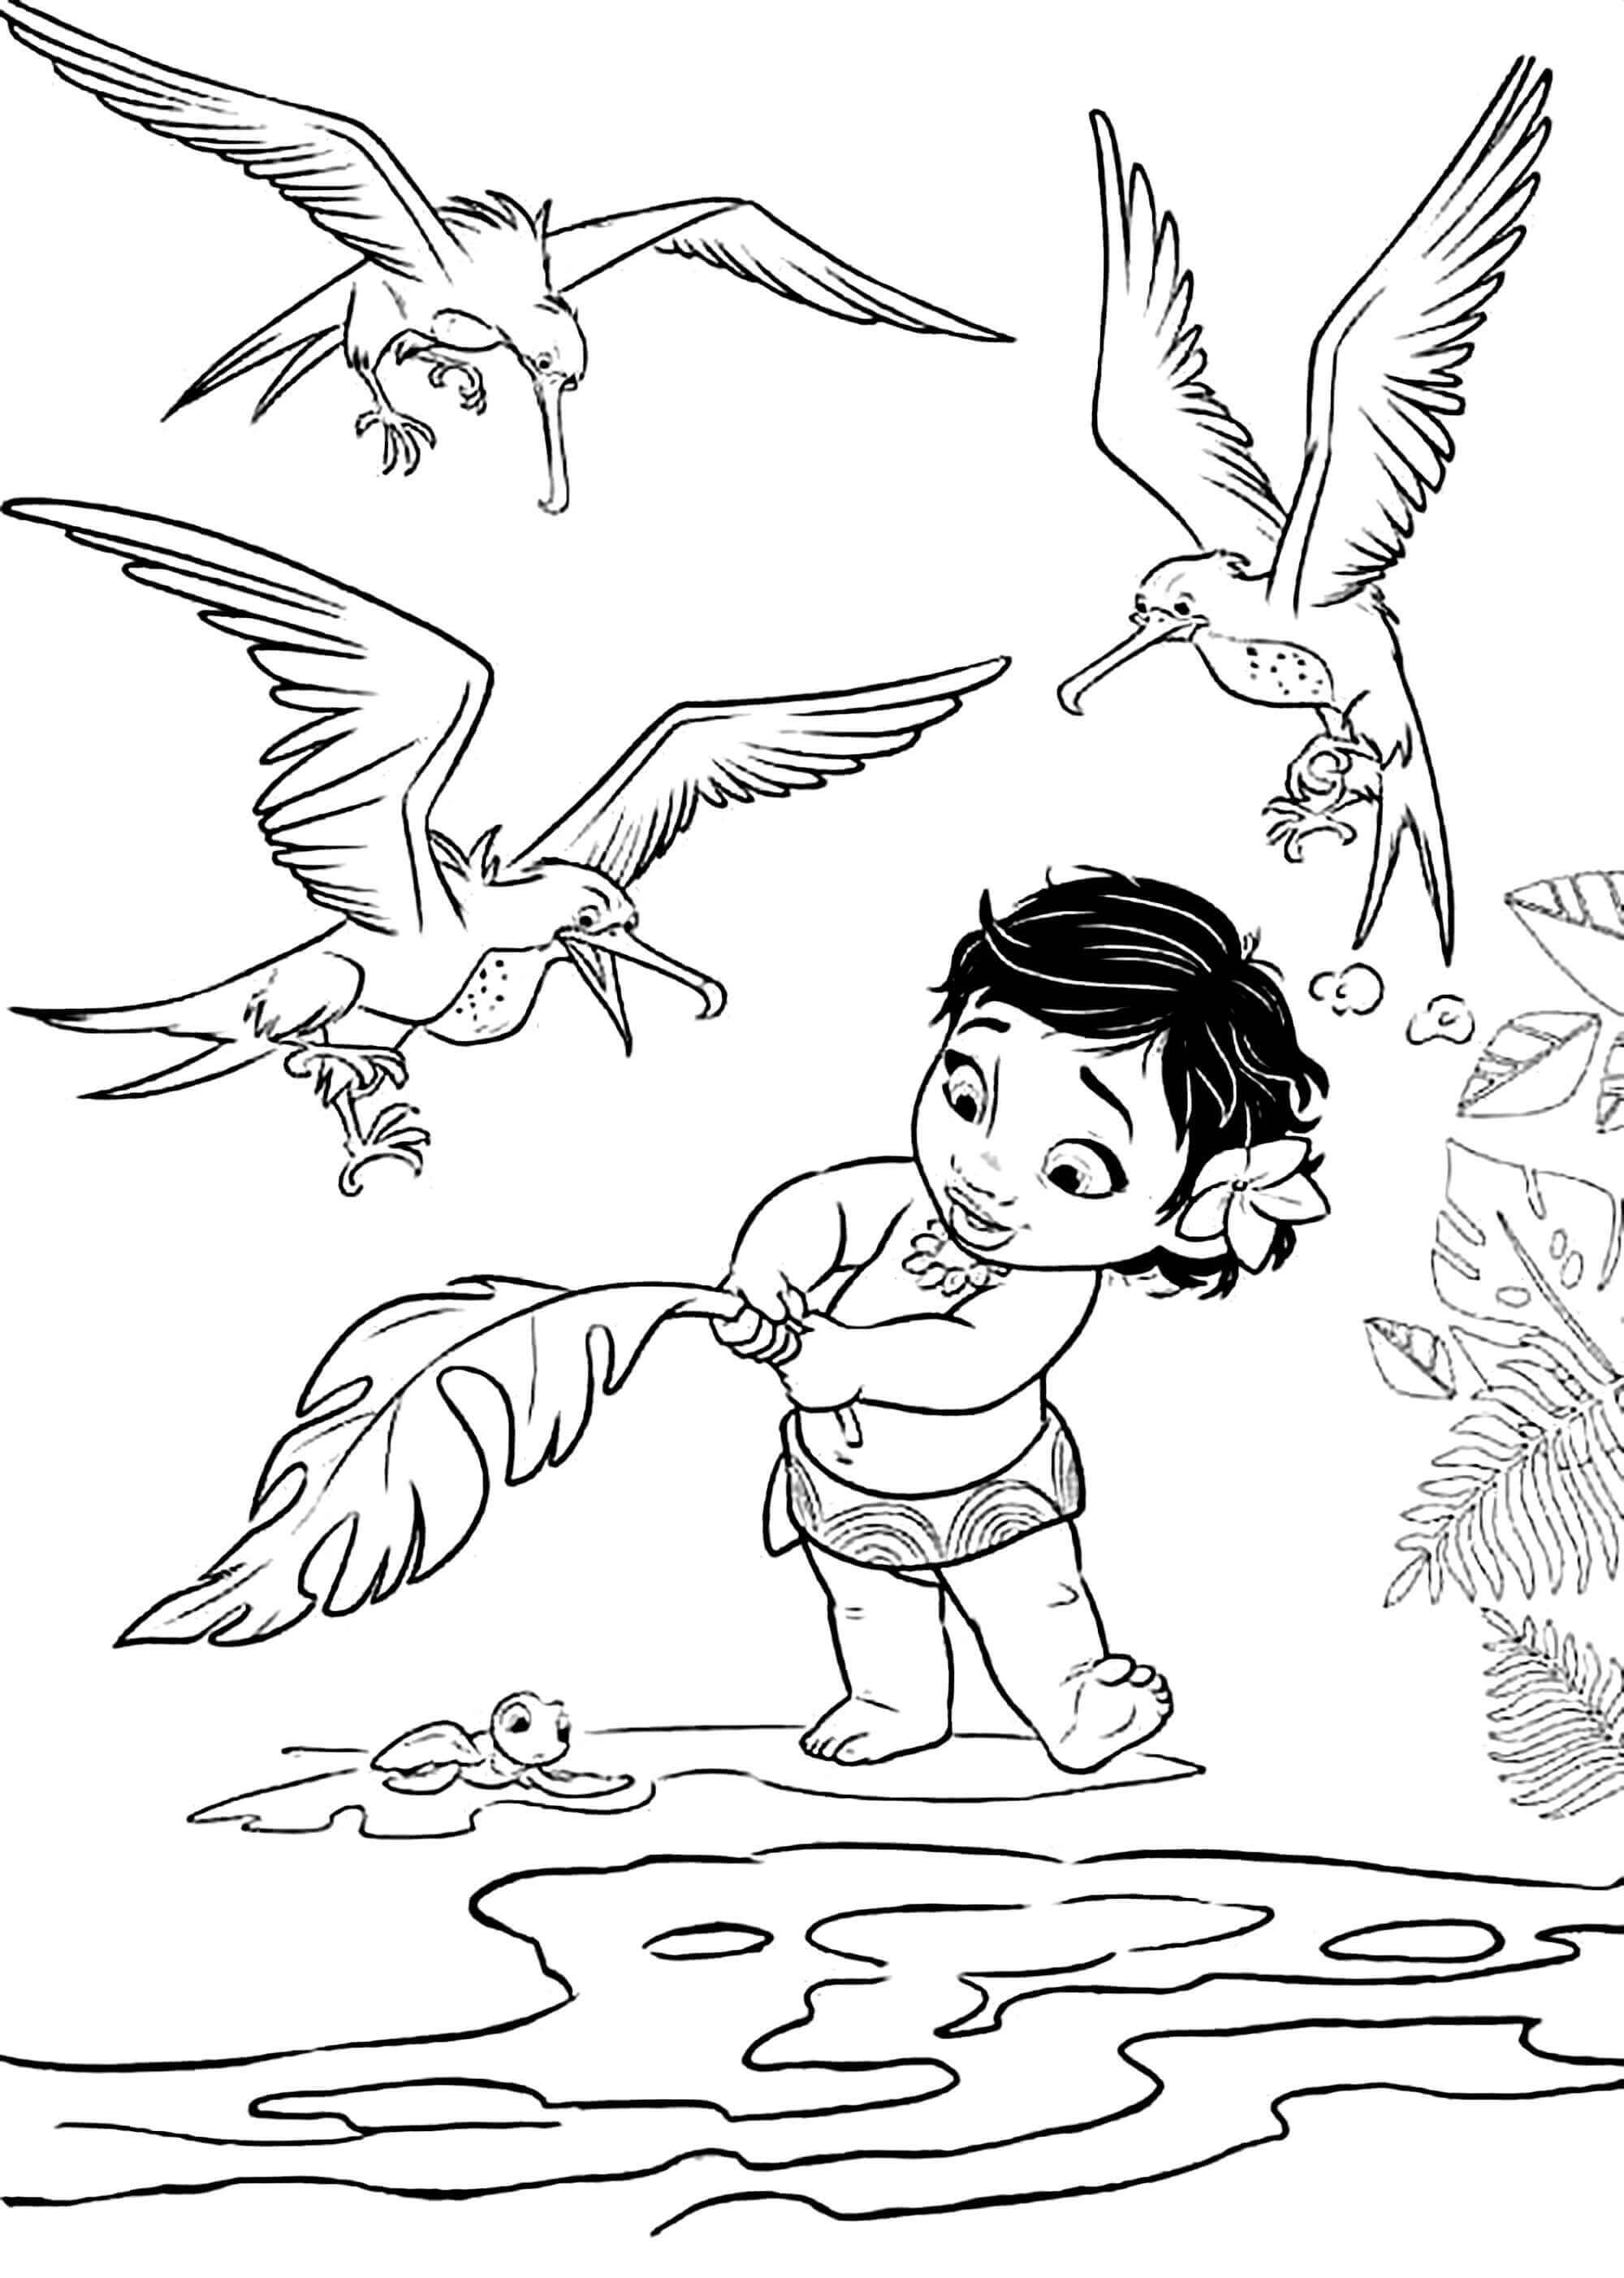 Moana Helping Baby Turtle Coloring Page